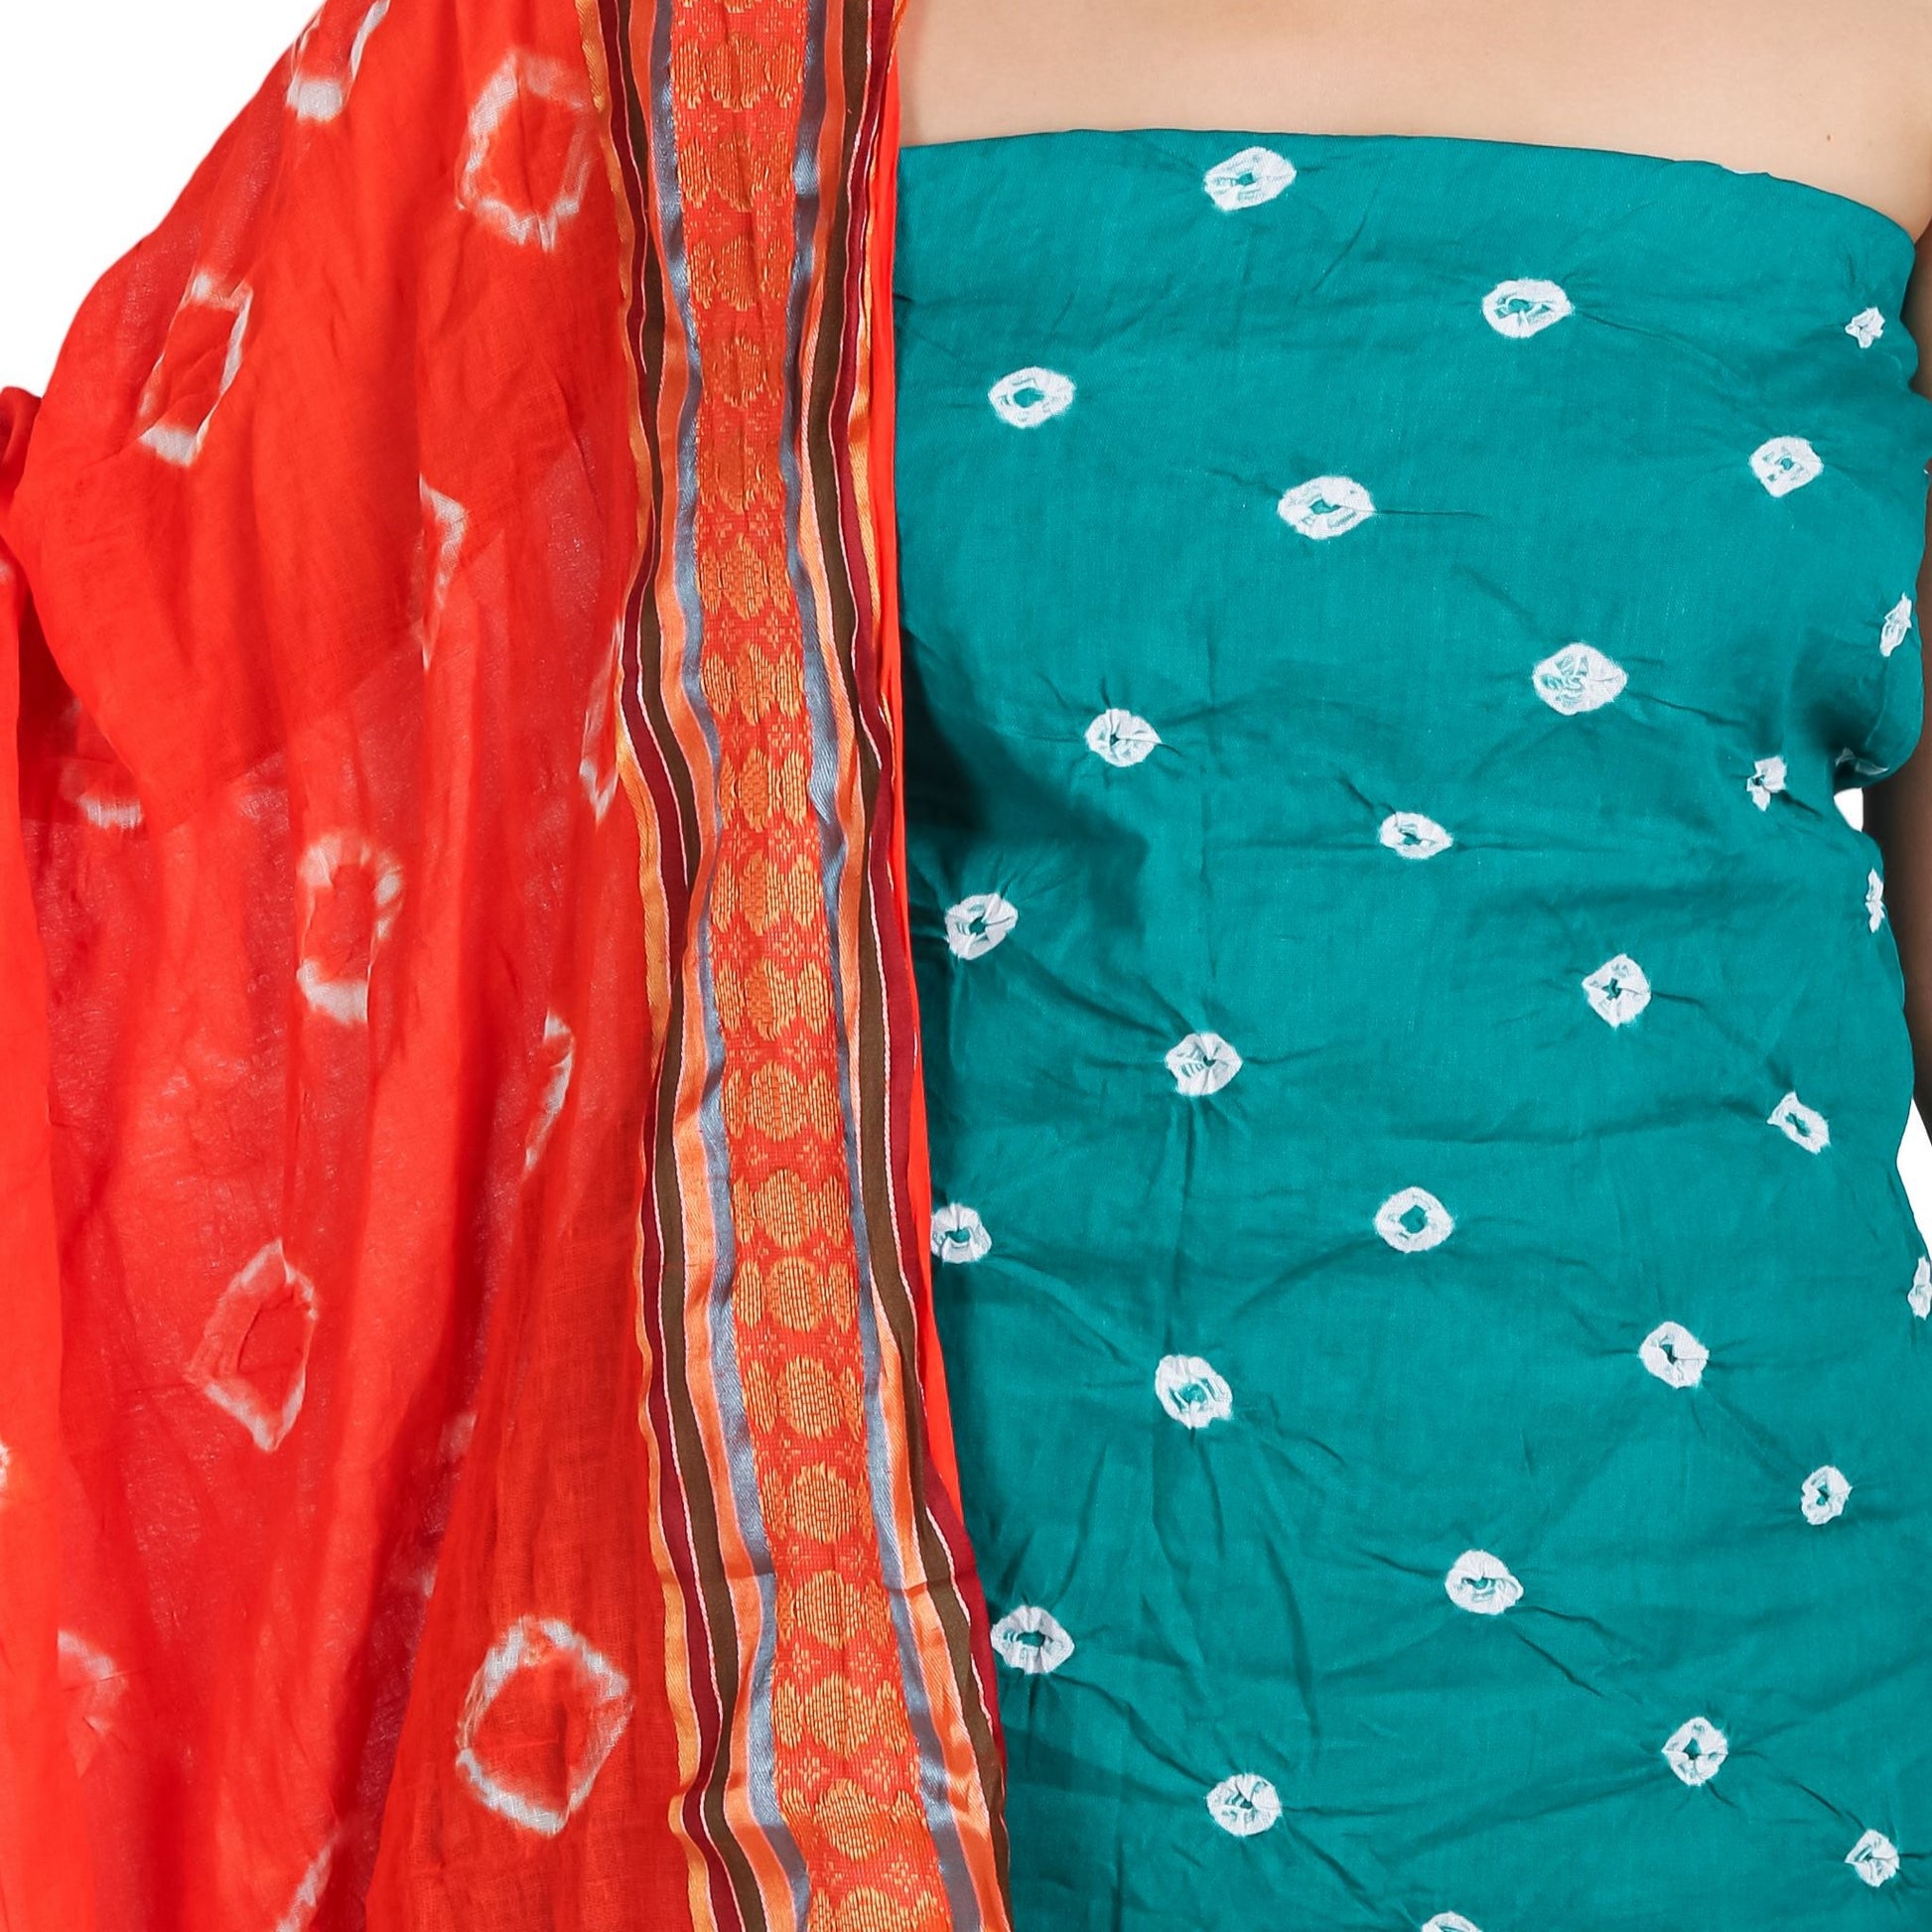 close-up view of teal color top with white bandhej prints